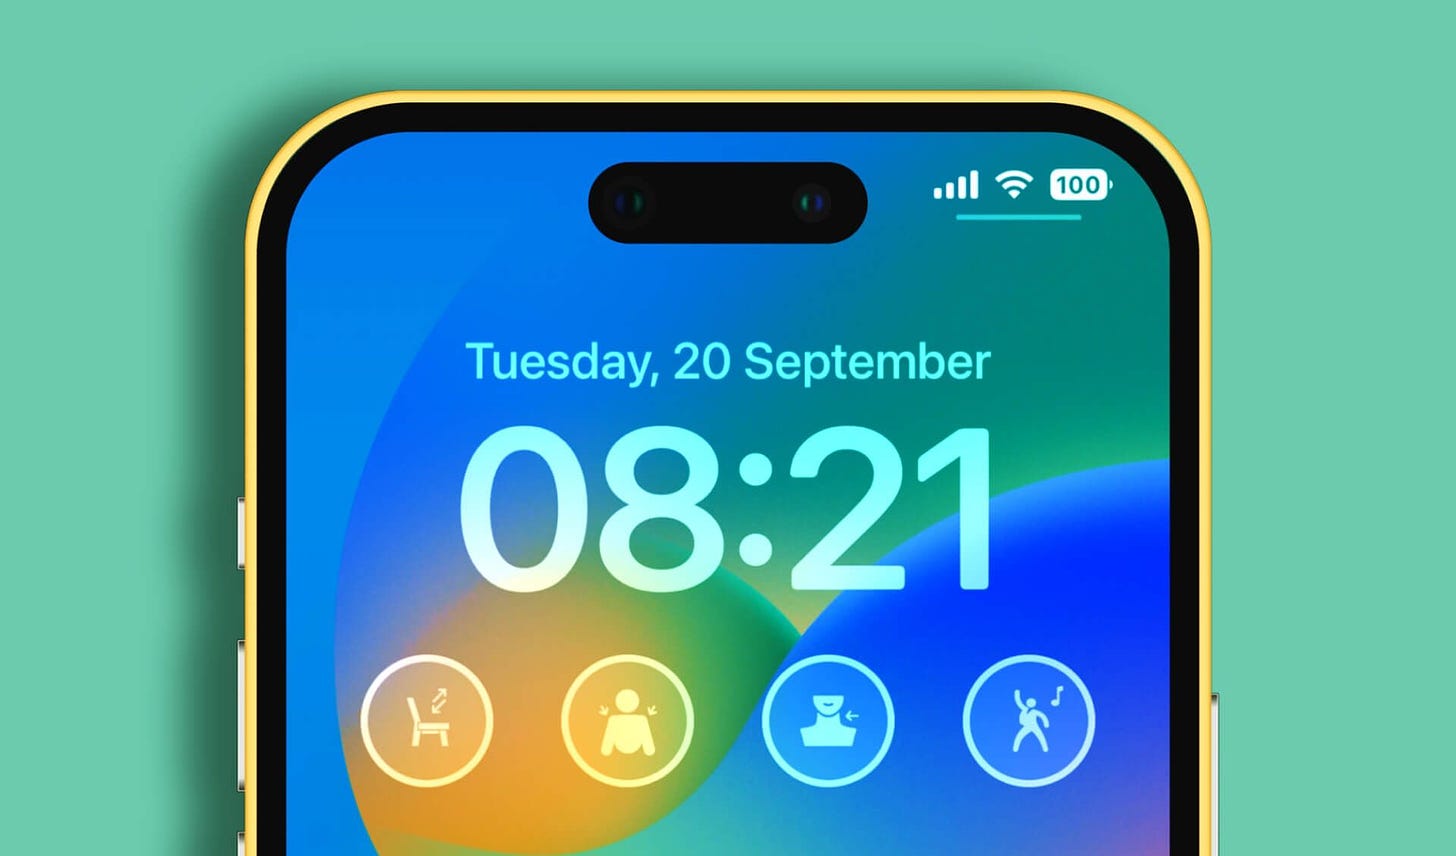 Launch your favorite Wakeouts right from the Lock Screen